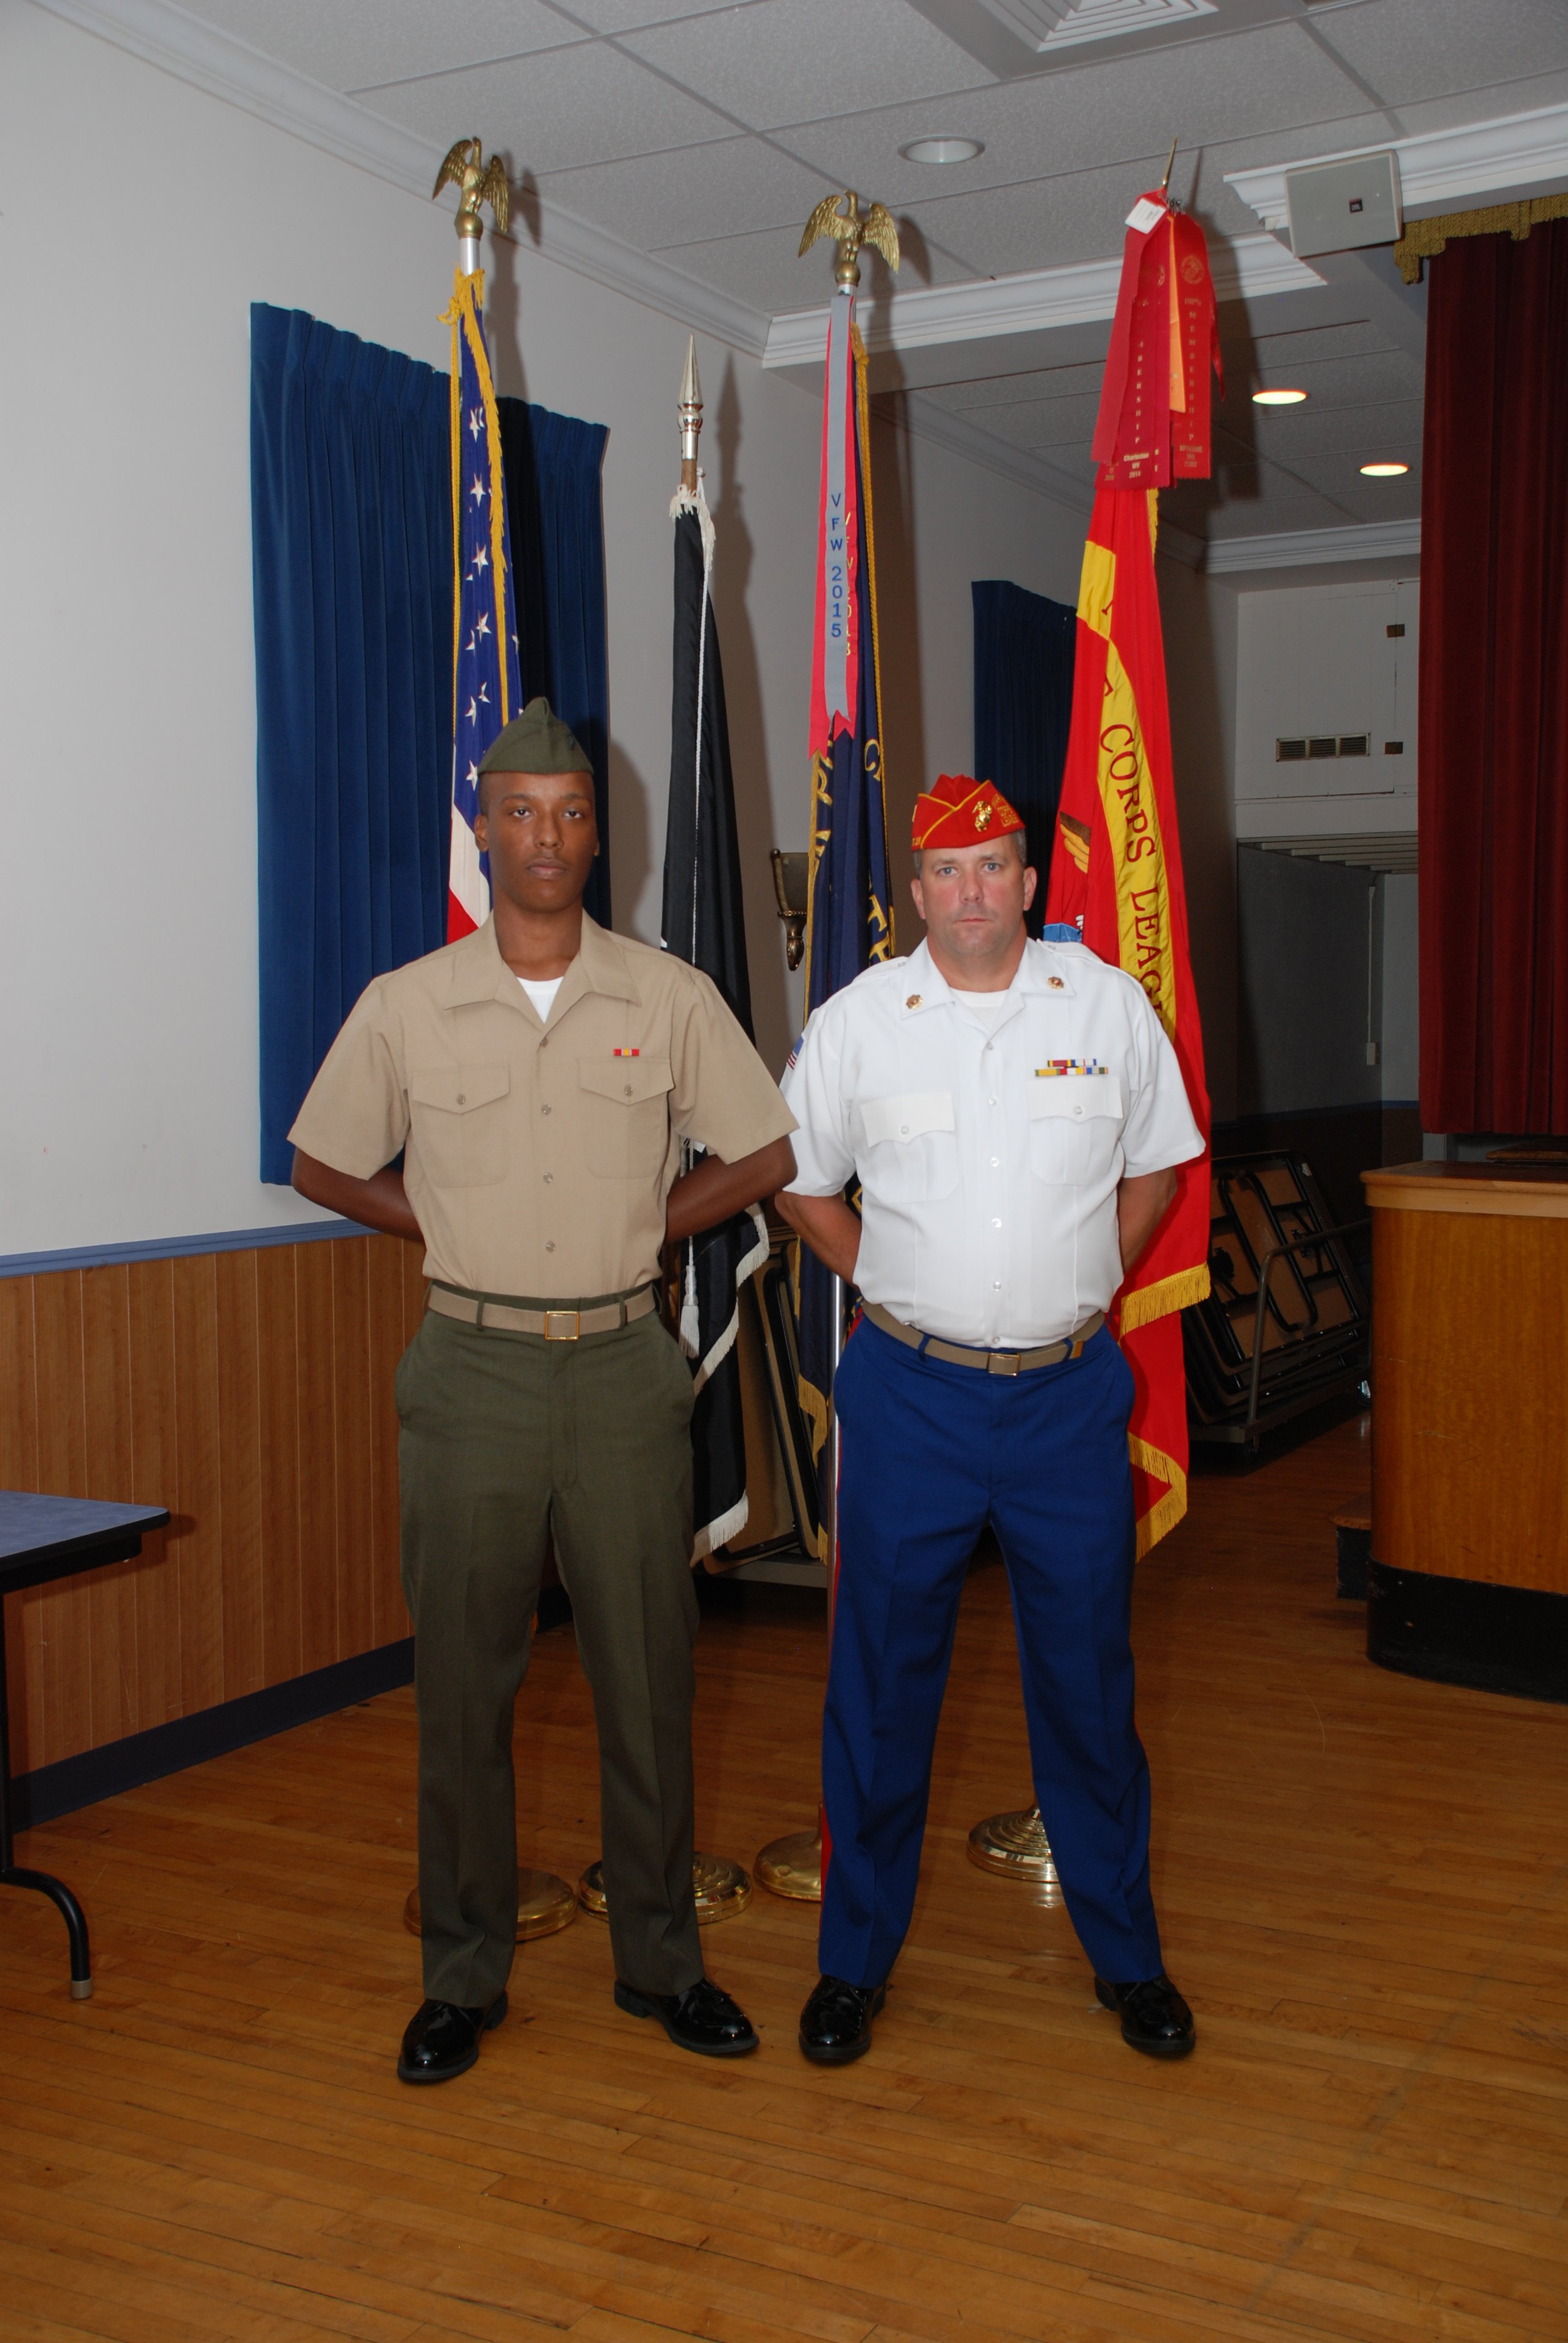  The detachment has a roster of marines that have served from the Korean War era to present day active duty 